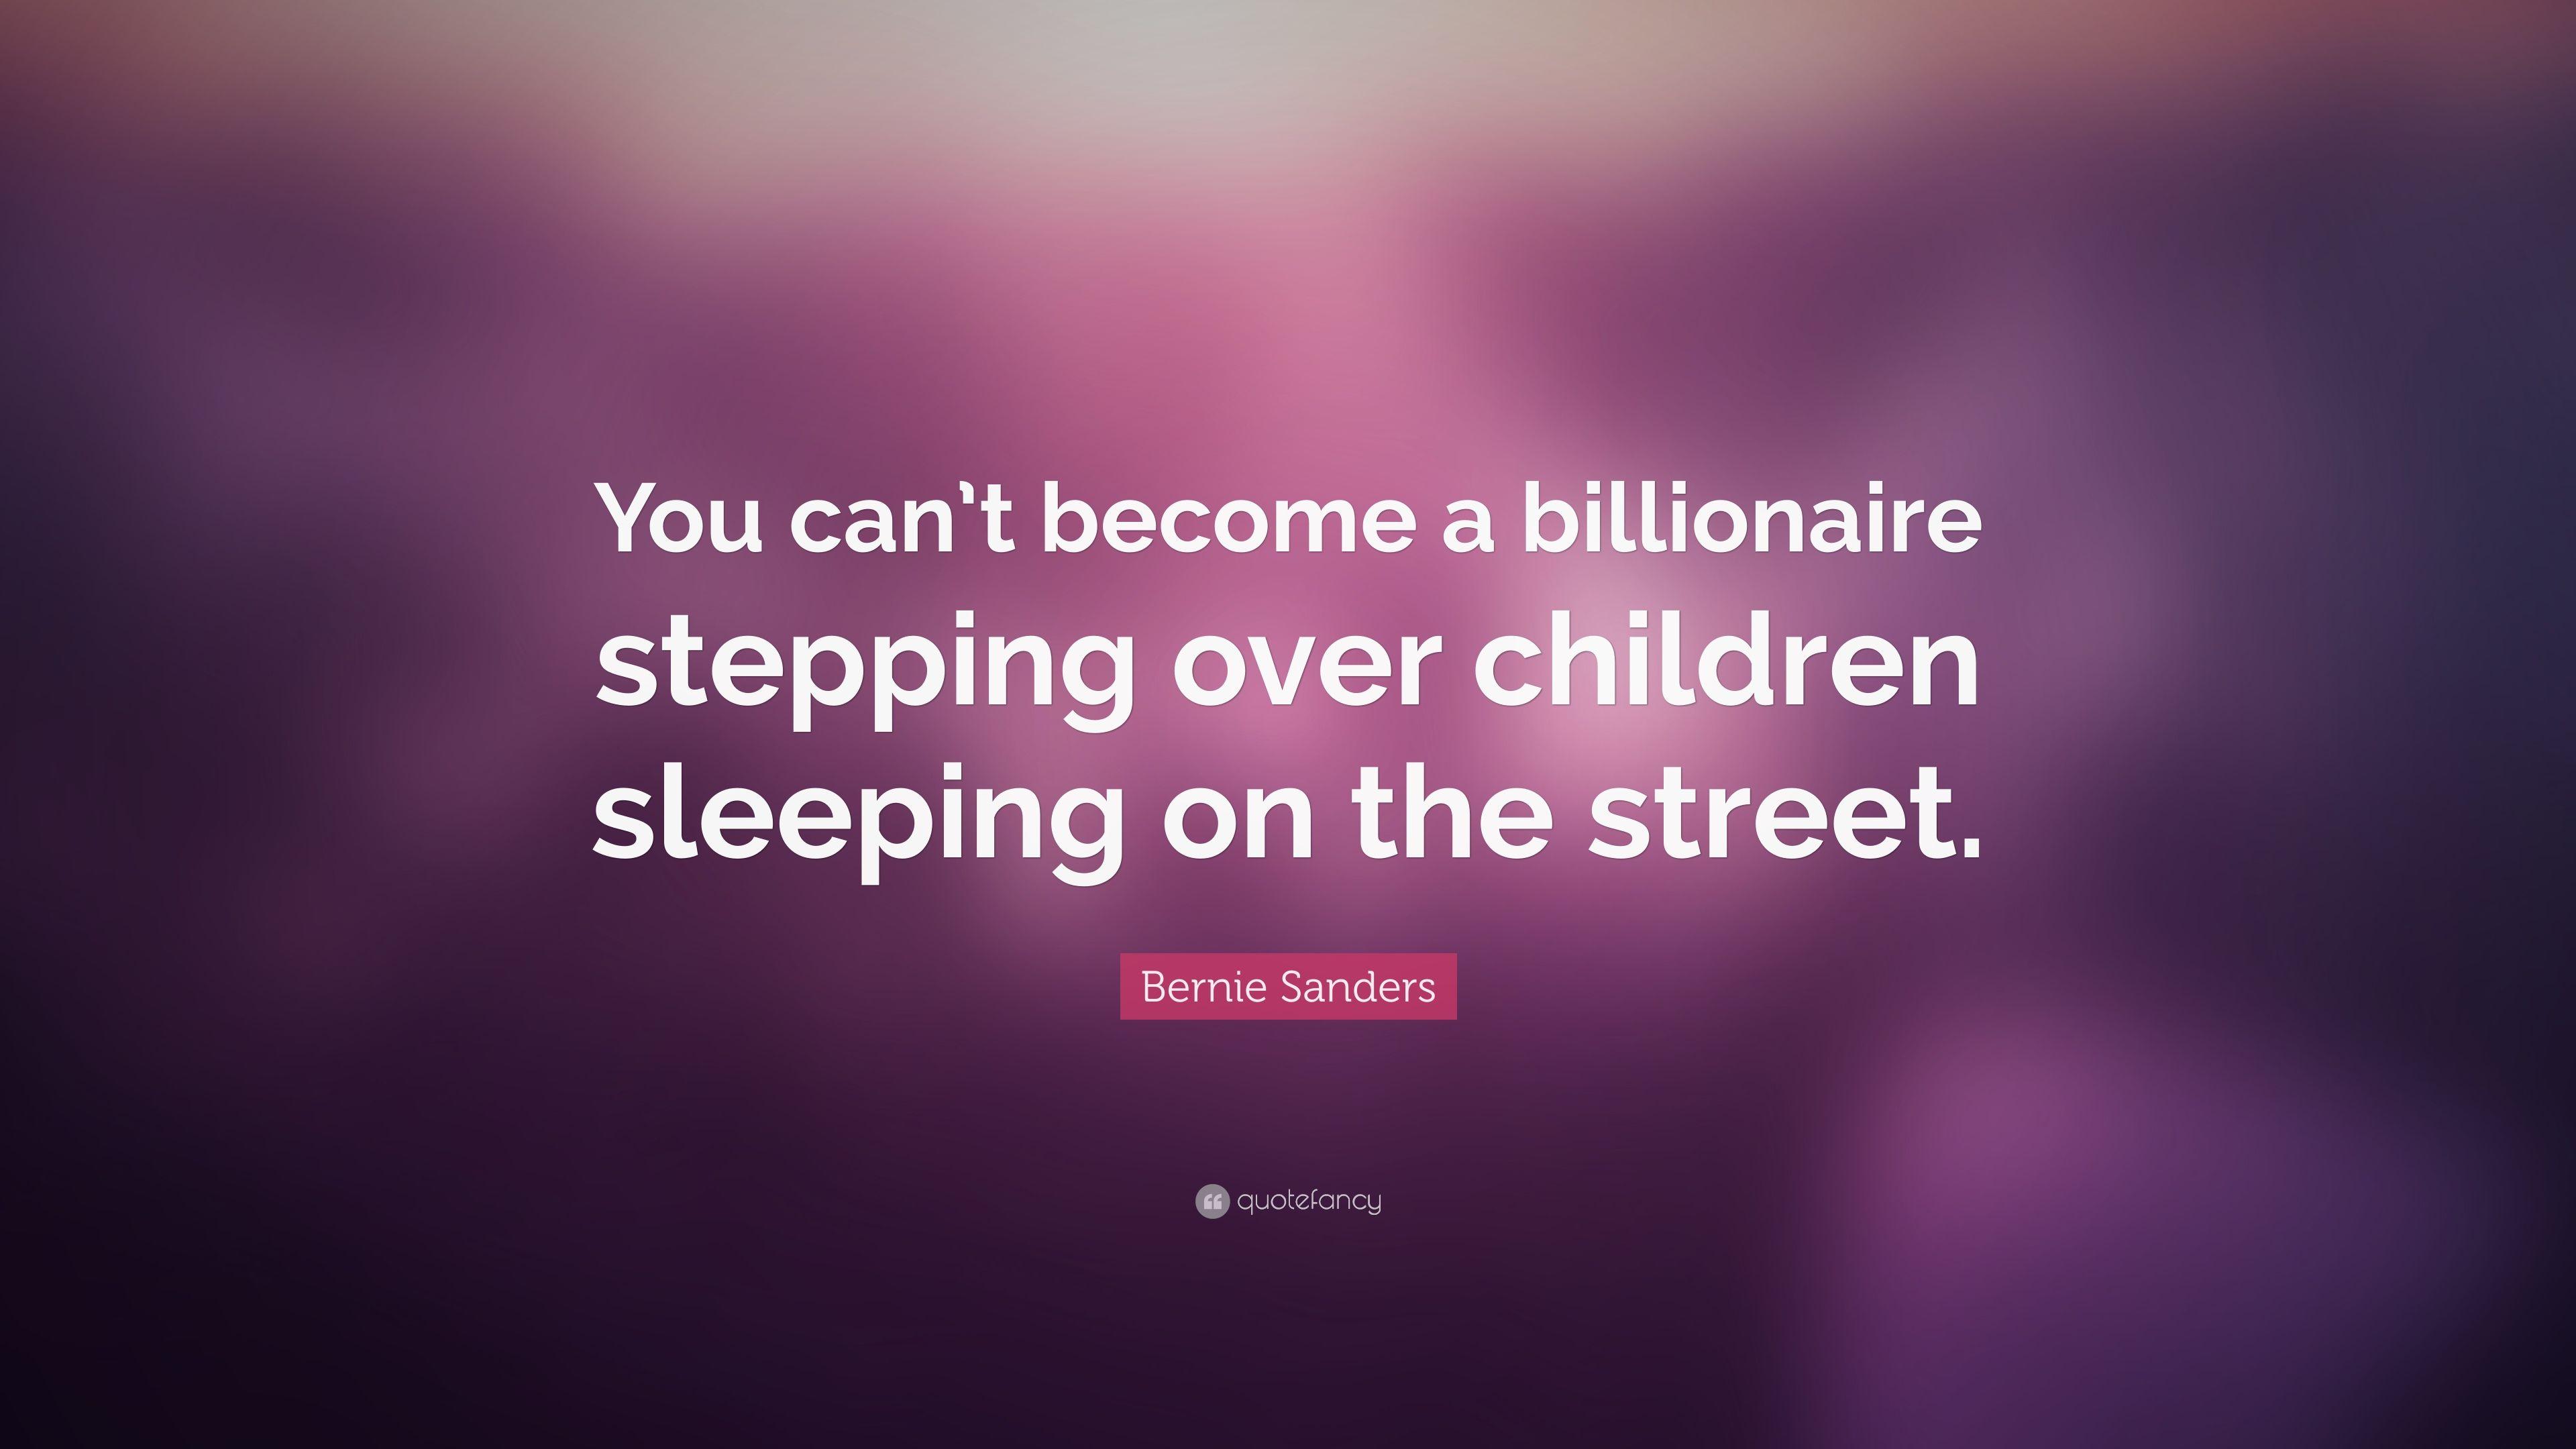 Bernie Sanders Quote: “You can't become a billionaire stepping over